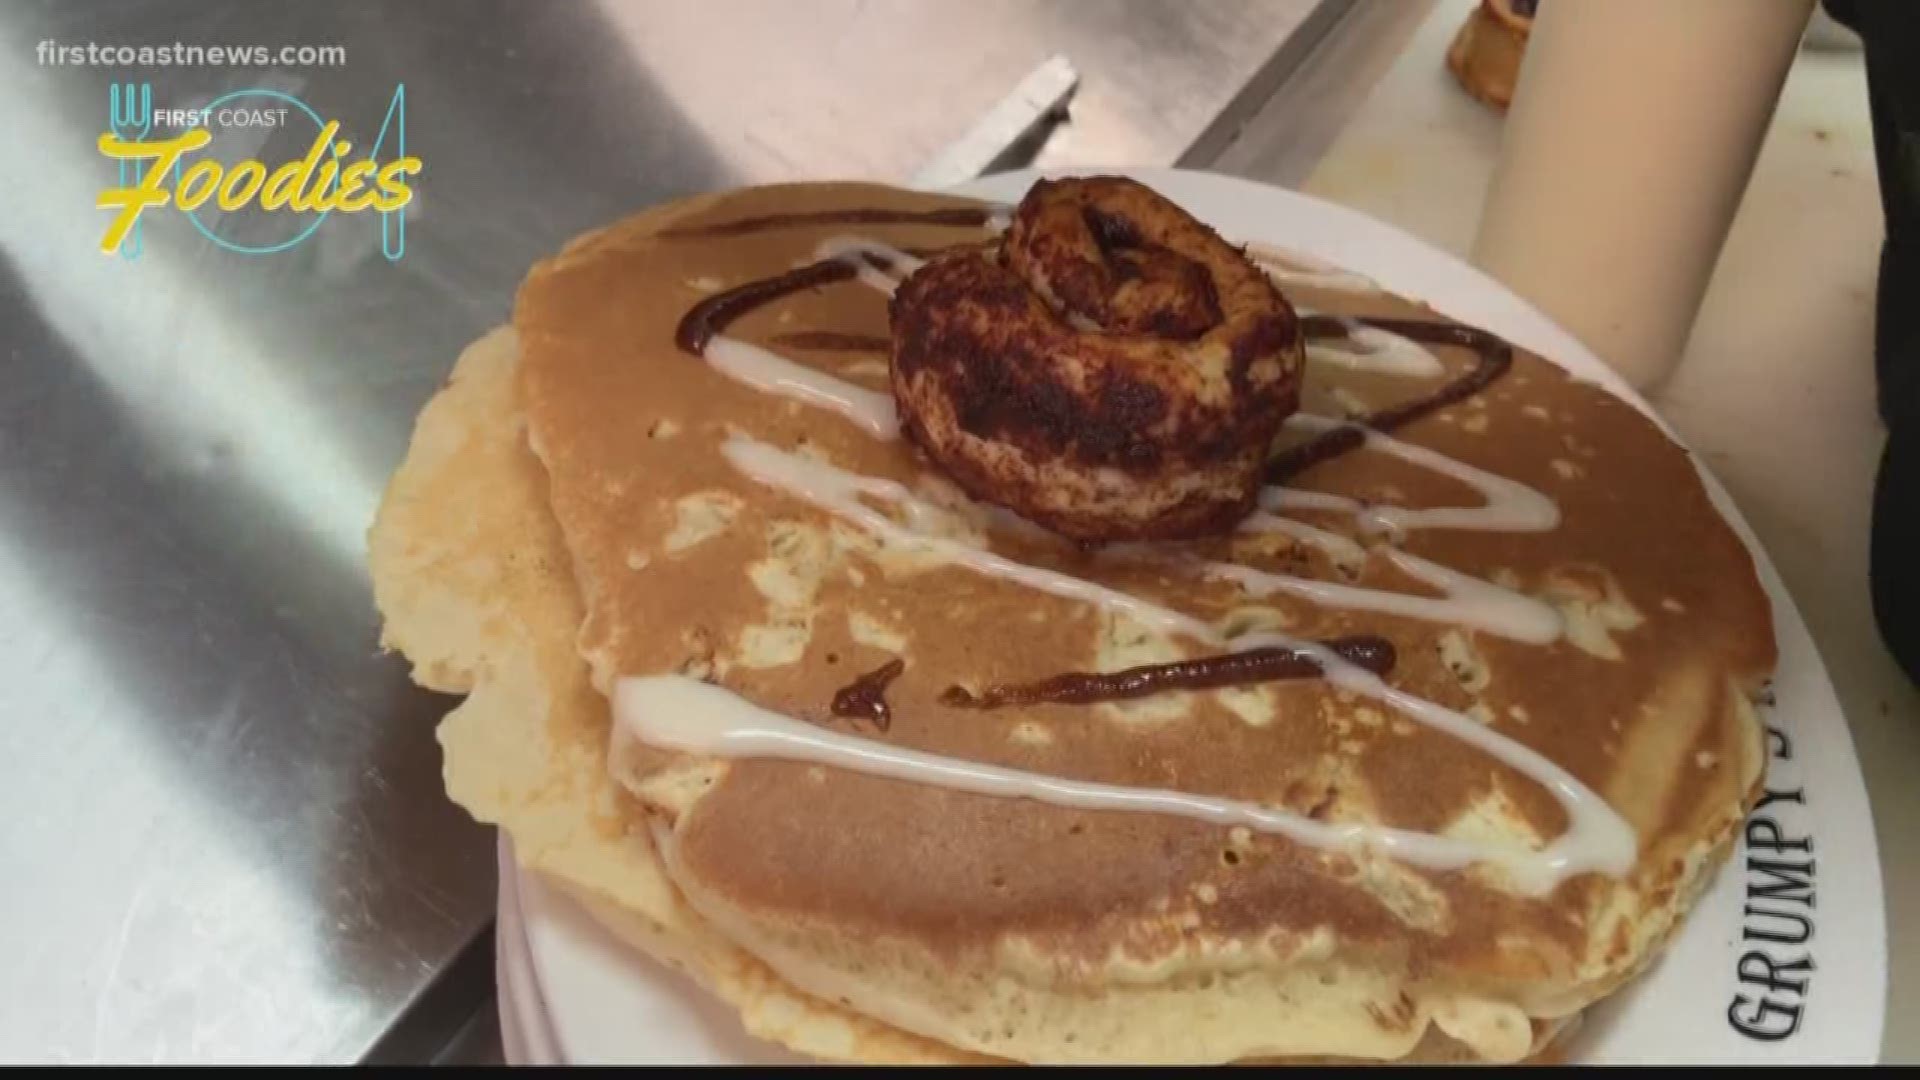 After nearly 20 years in business Grumpy's Diner in Orange Park continues to satisfy customers with big portions and southern hospitality.